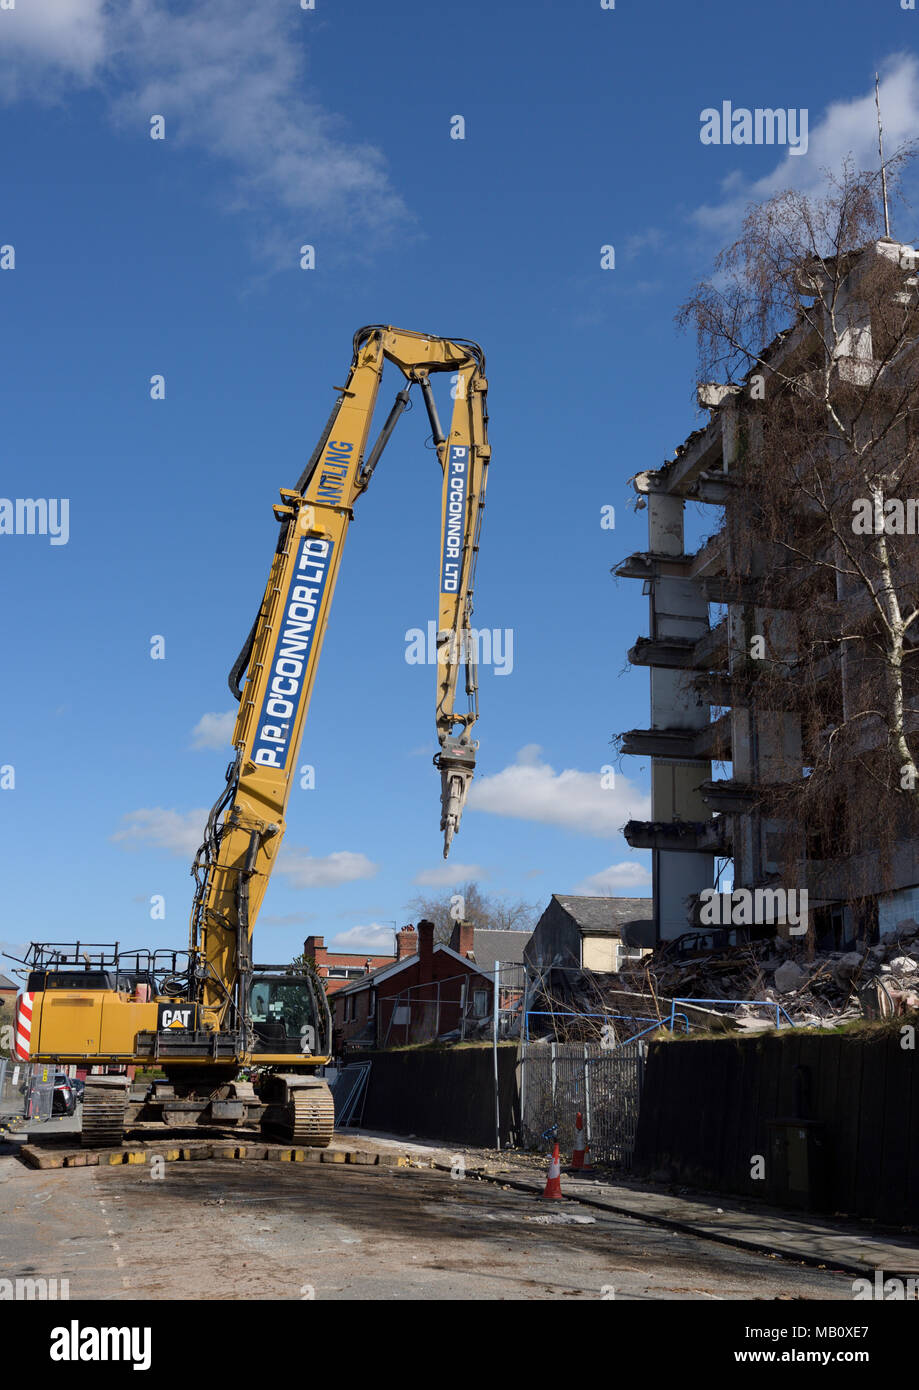 Caterpillar 350L high reach demolition excavator with concrete crusher attachment on road in front of partly demolished concrete building in bury uk Stock Photo